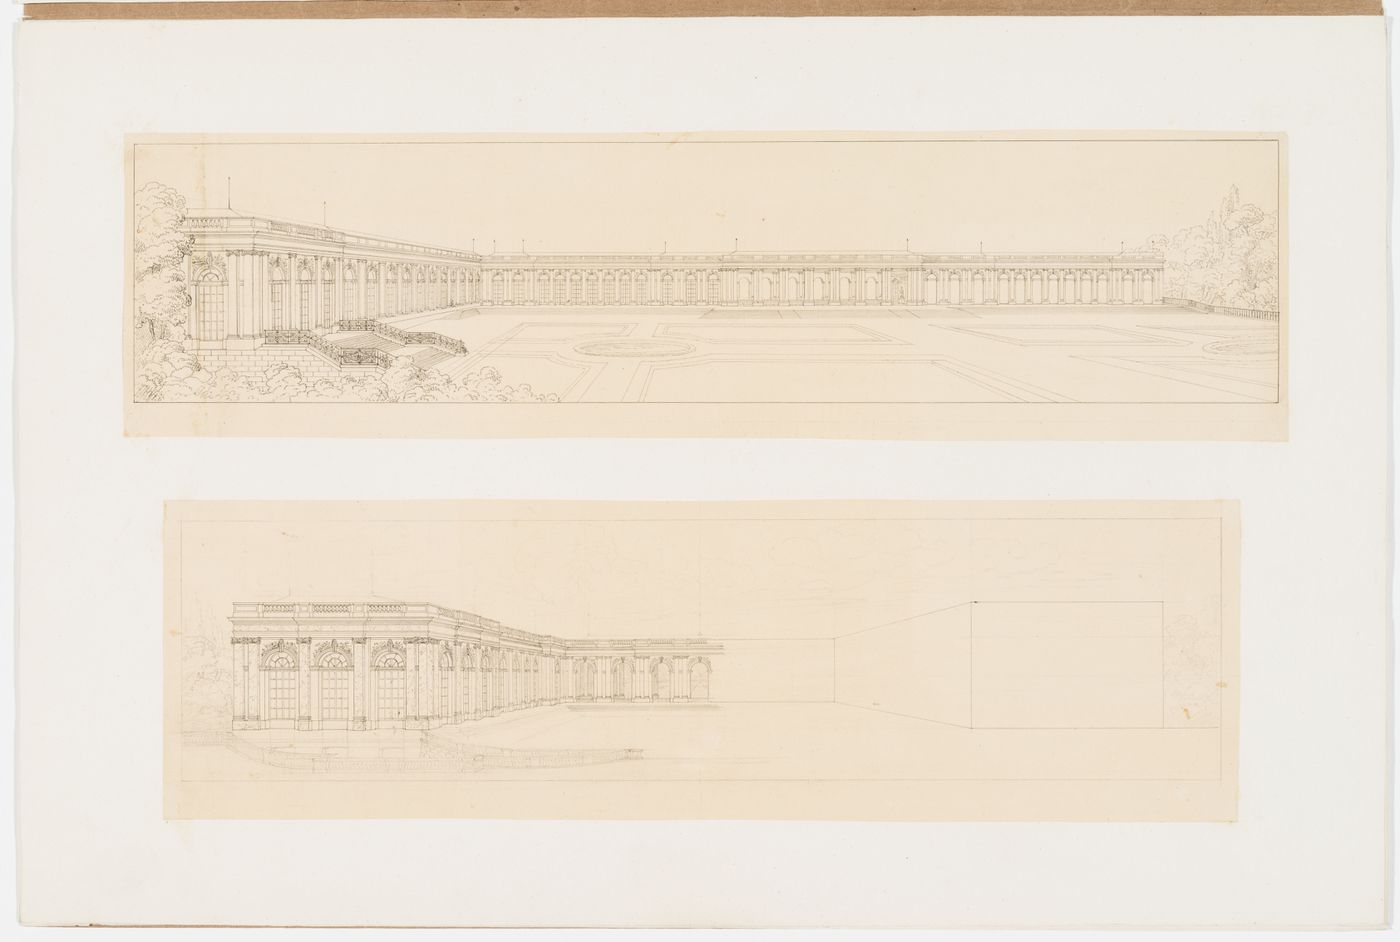 Exterior perspective of a courtyard and a building showing three different types of colonnades with one collonaded wing; Exterior perspective of a colonnaded building with two wings